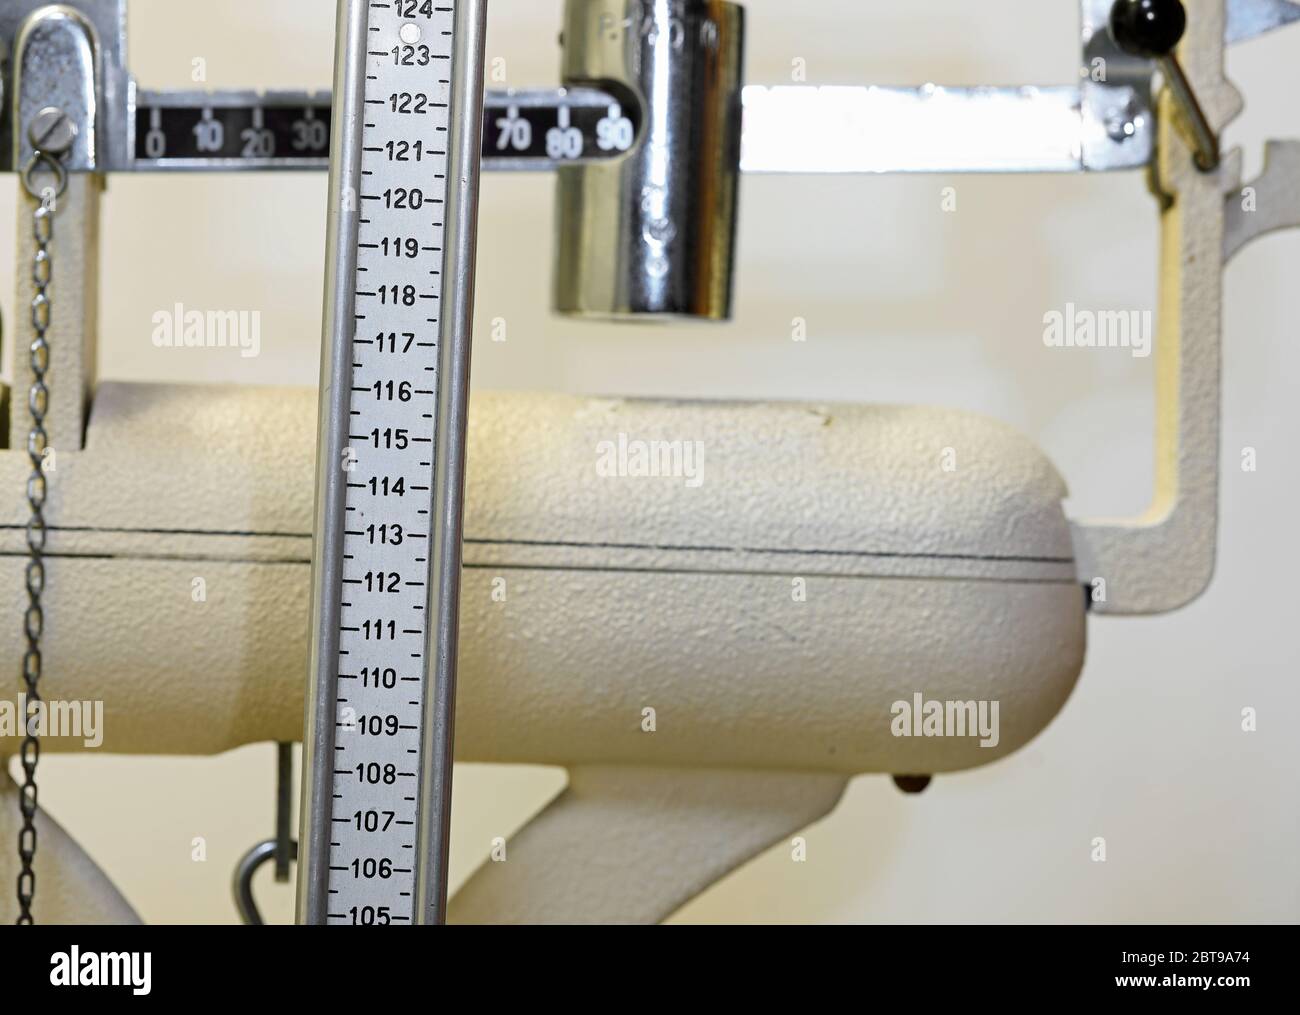 https://c8.alamy.com/comp/2BT9A74/vintage-bathroom-scale-with-rod-with-measure-for-patient-measurement-in-the-medical-clinic-during-exams-2BT9A74.jpg